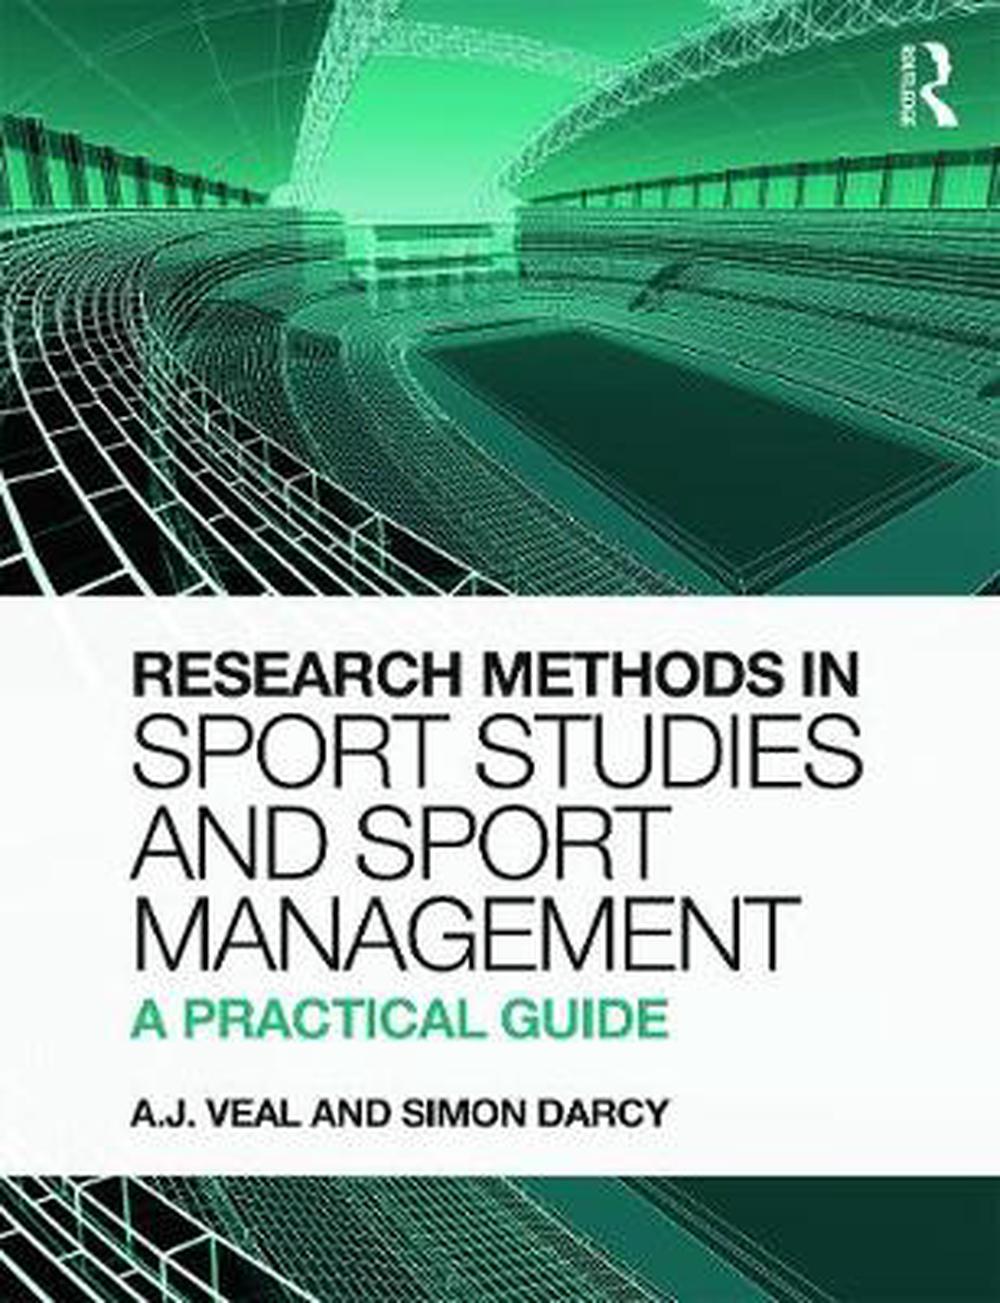 market research methods in the sports industry